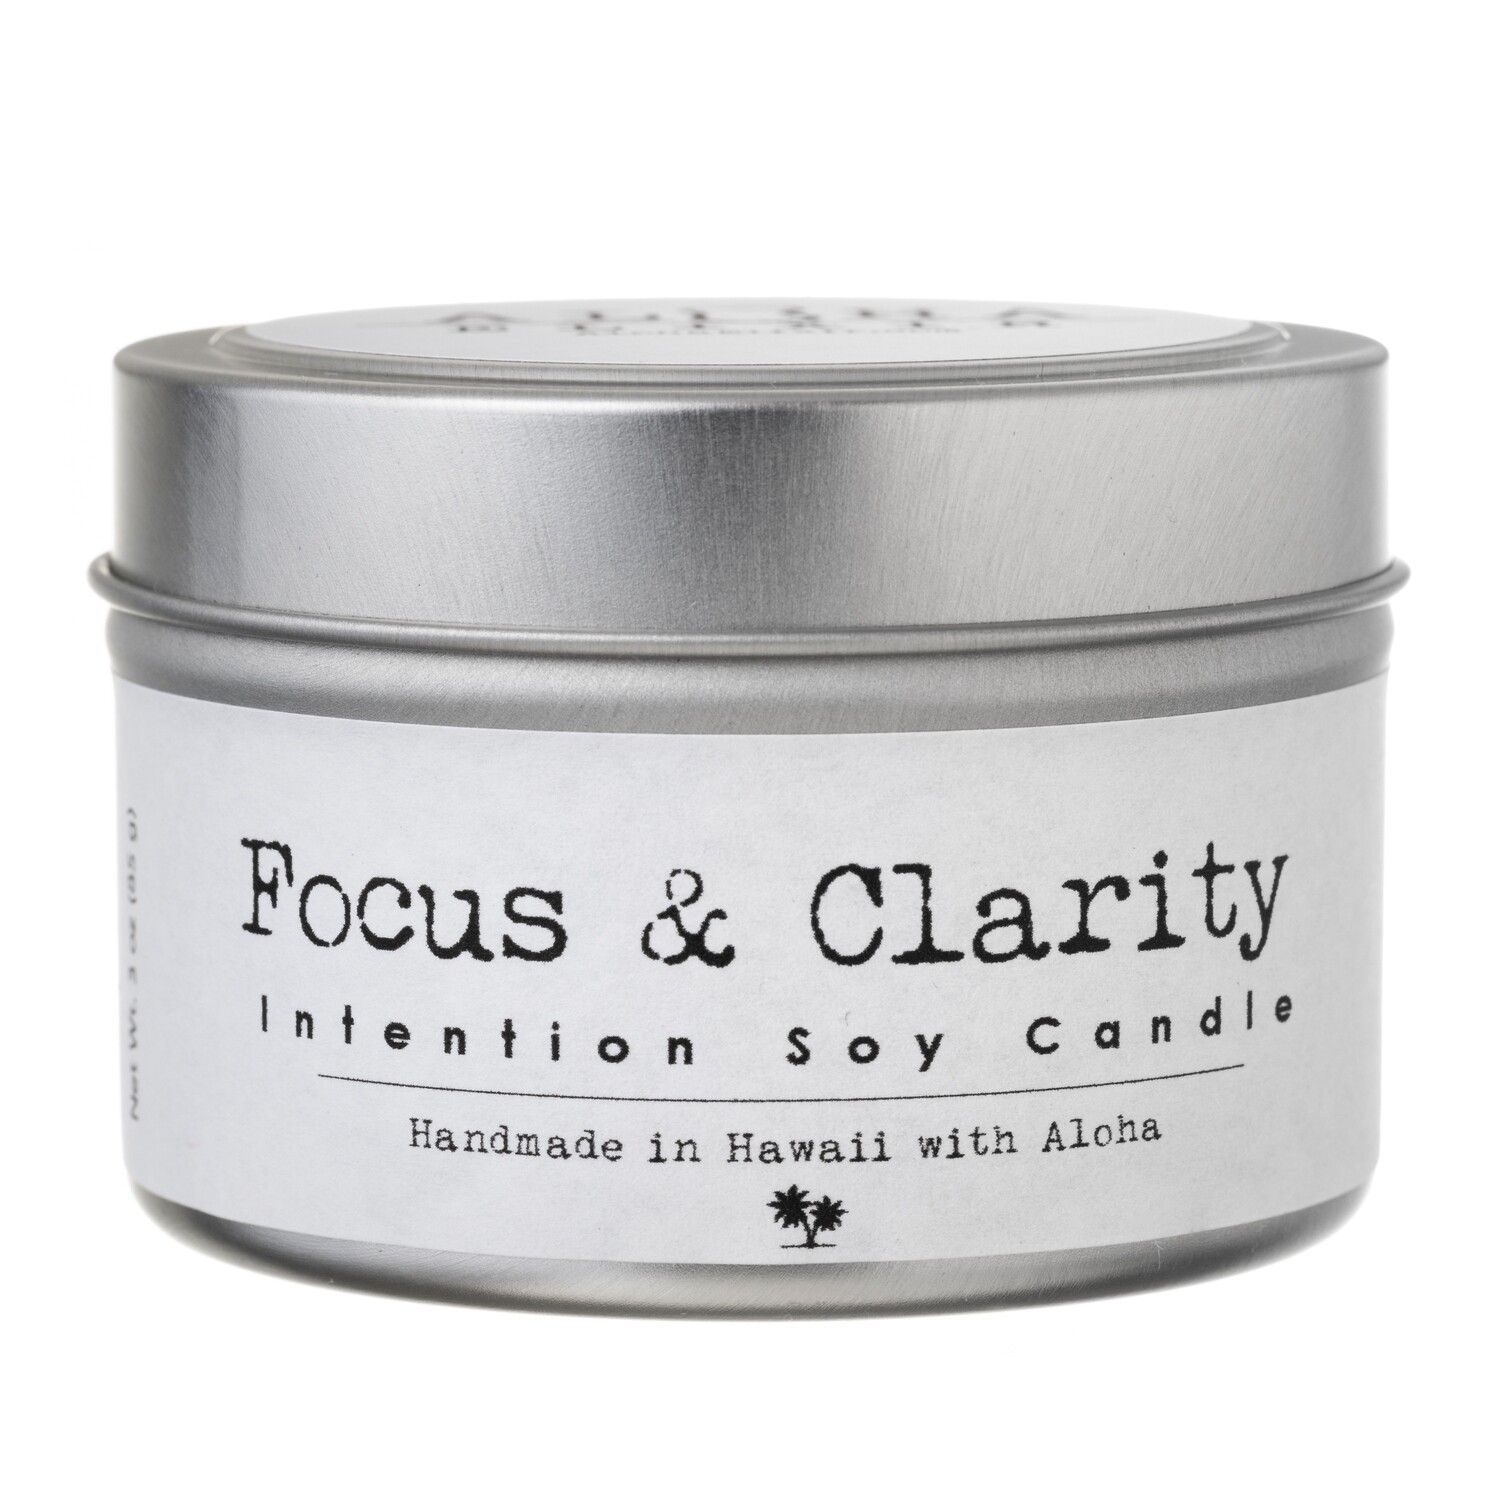 Focus and Clarity Collaboration Candle!